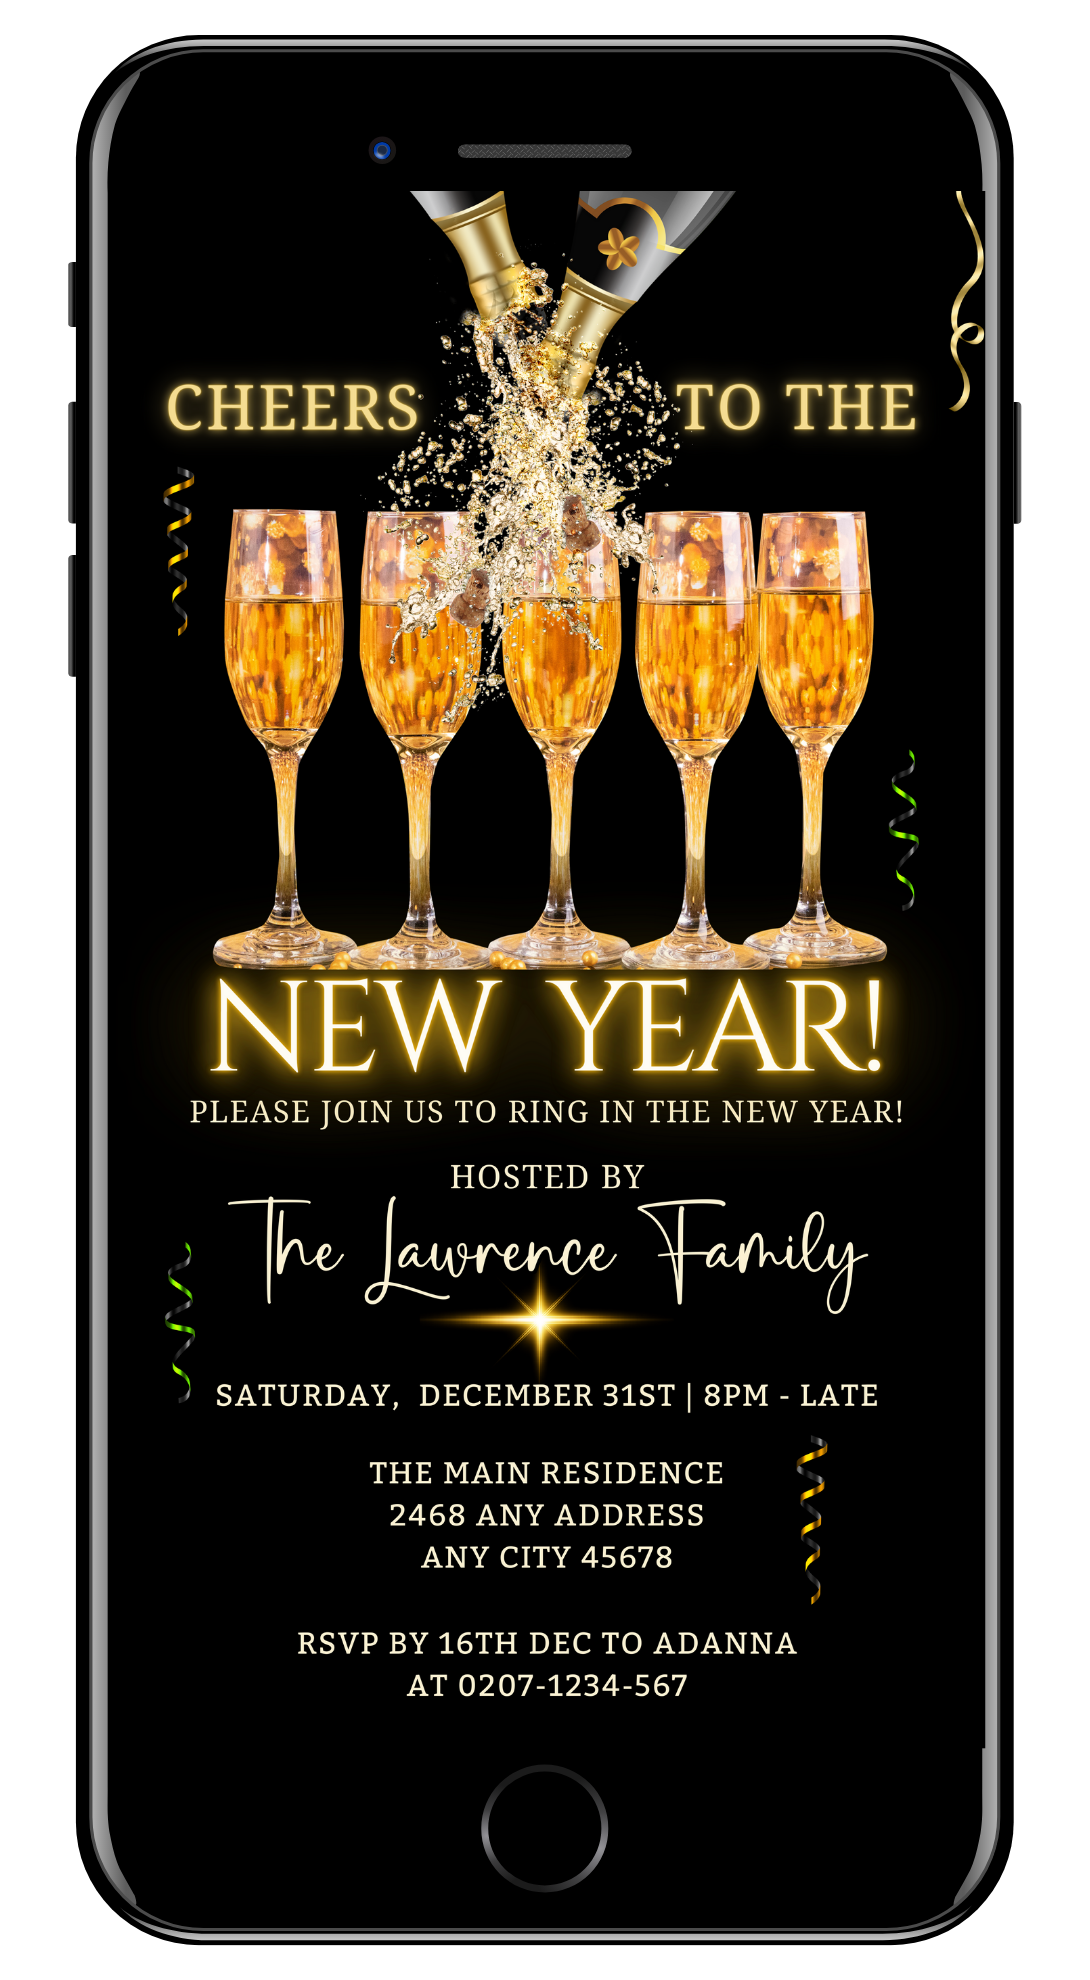 Splashing Champagne Neon Cheers NY Party Evite on a phone screen, showing a group of champagne glasses. Editable digital invitation for New Year's celebrations.